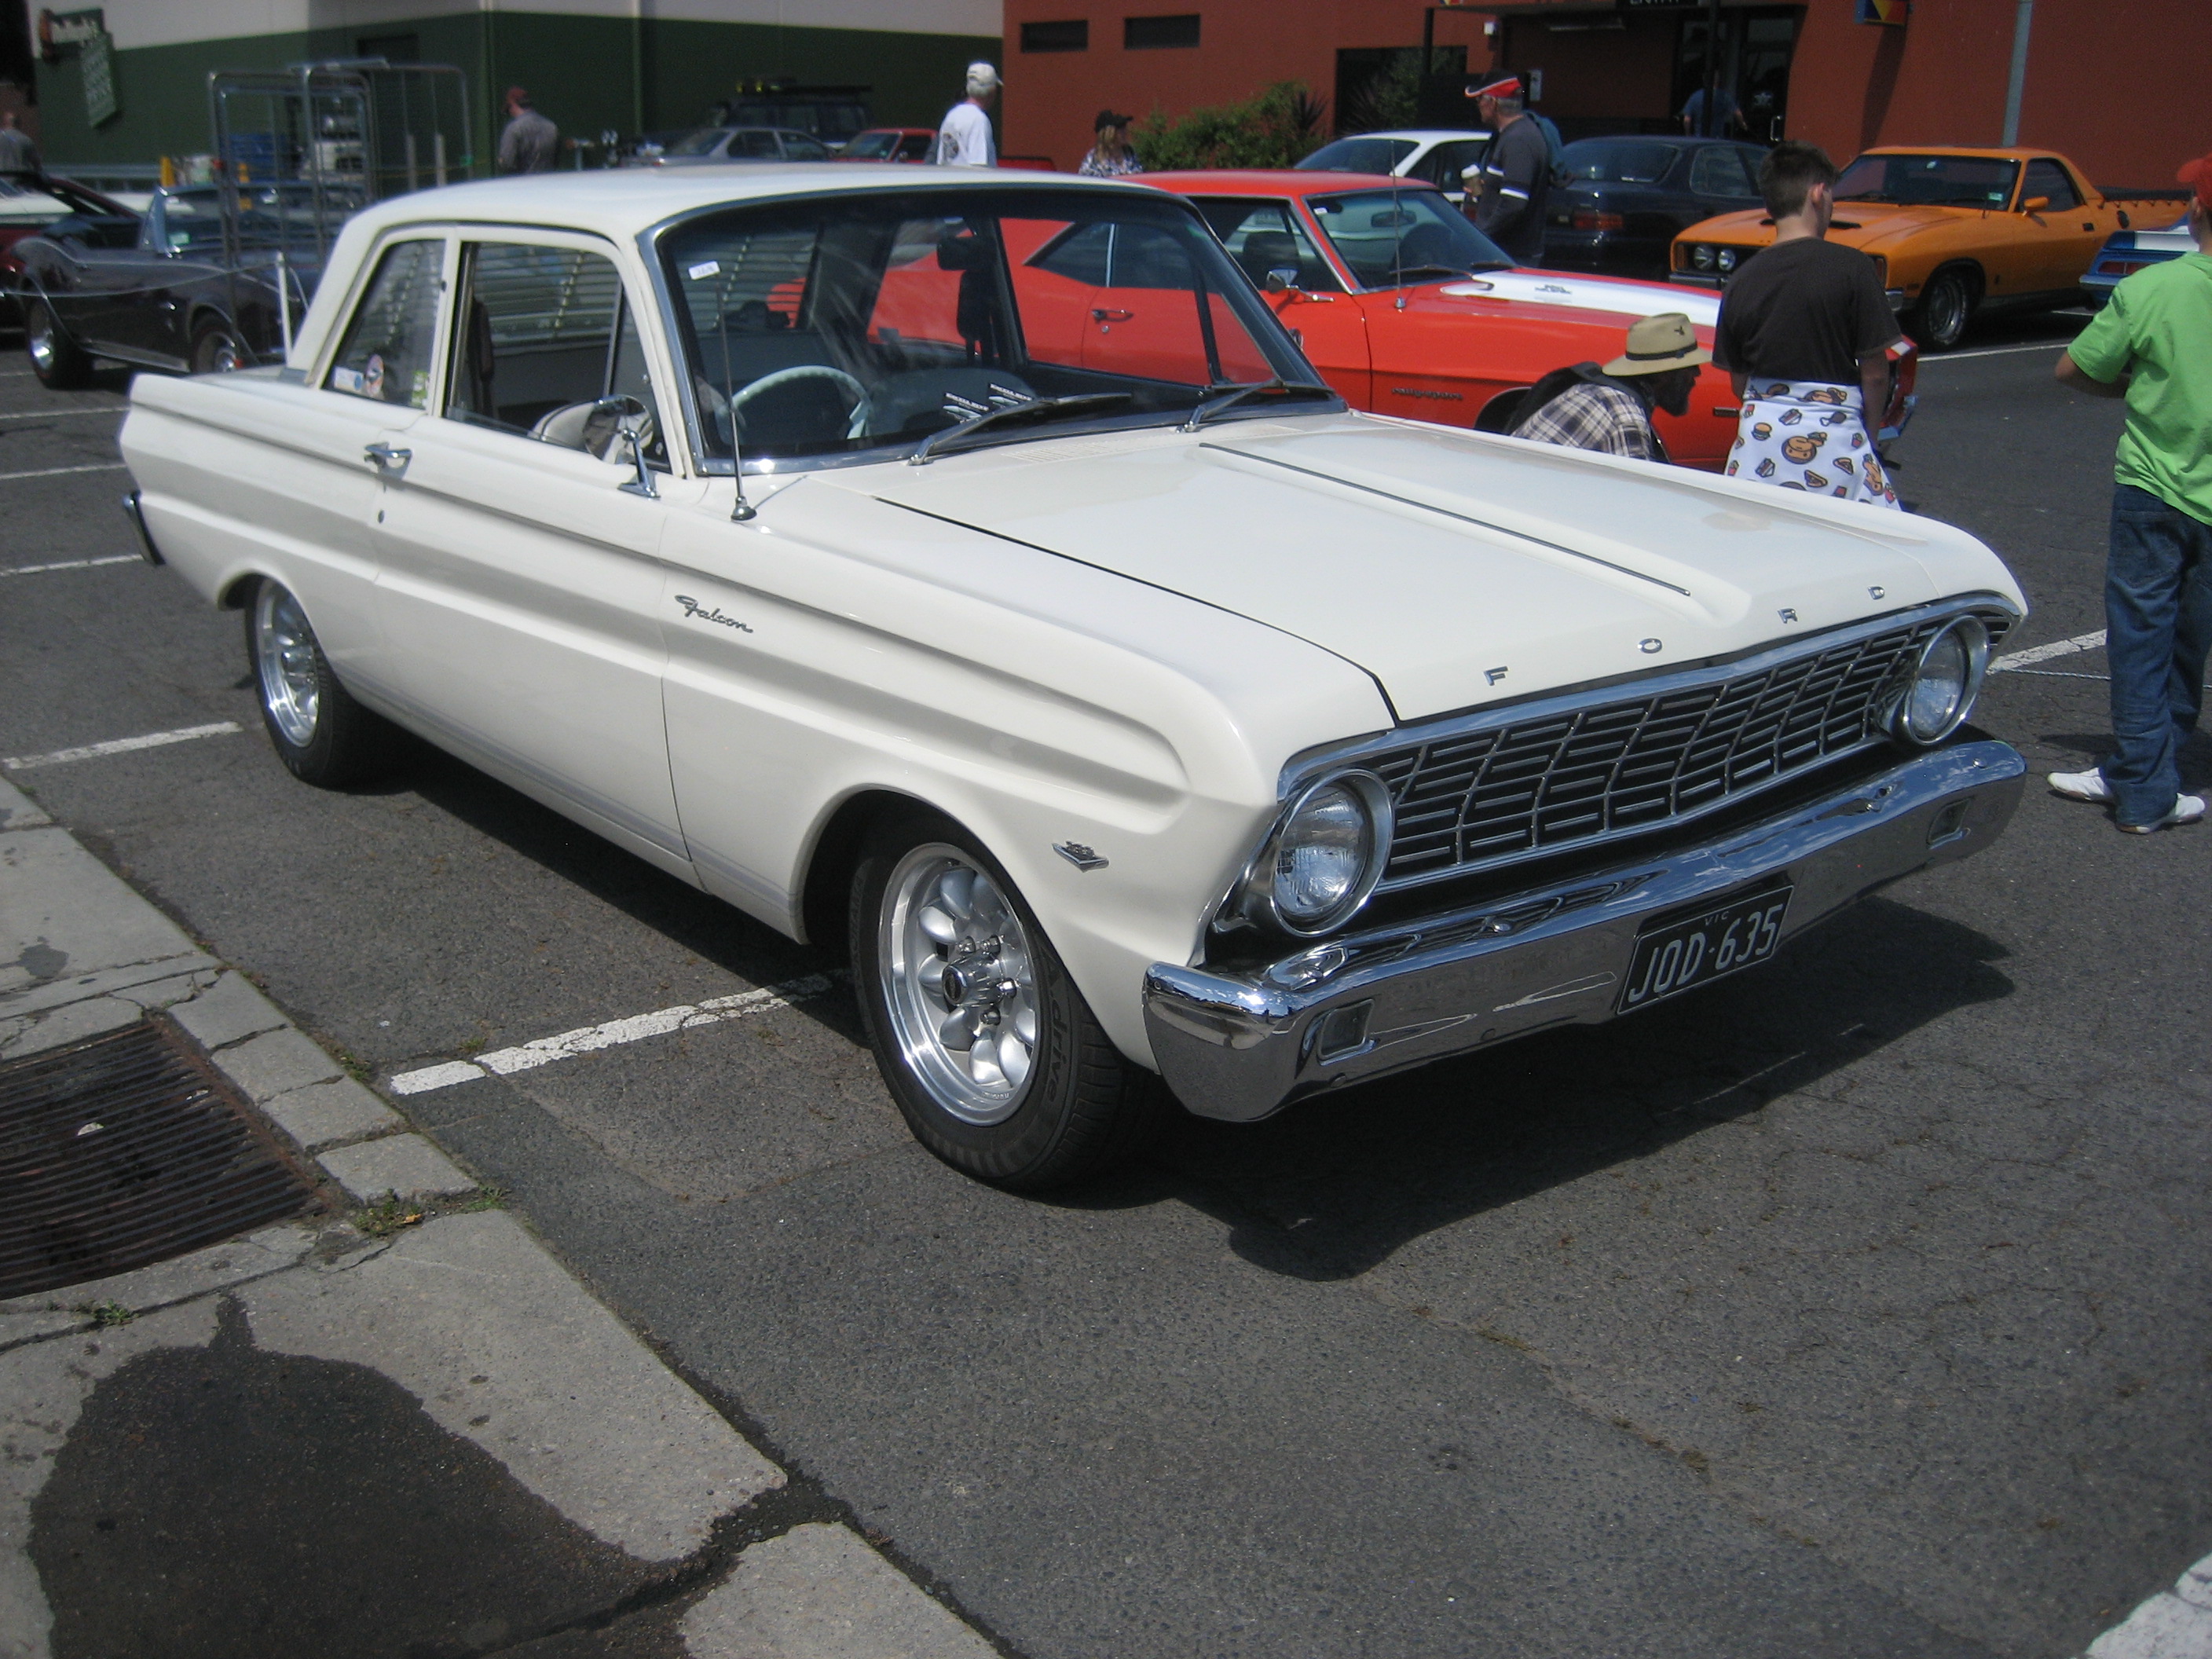 HQ 1964 Ford Falcon Wallpapers | File 1599.53Kb